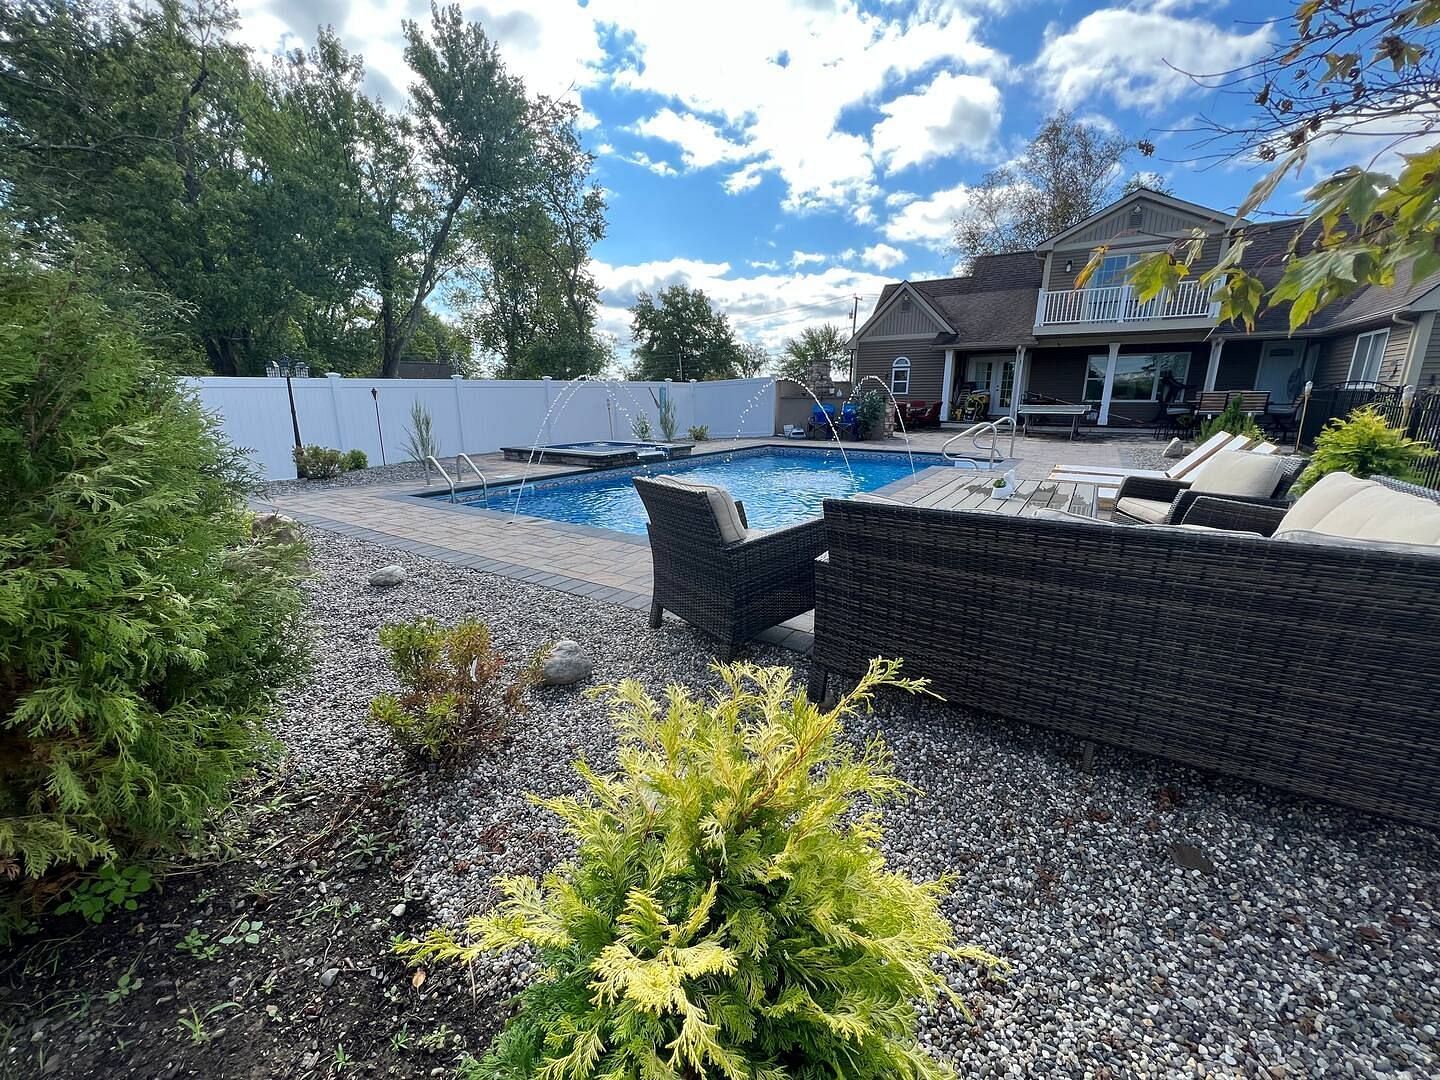 JWguest Villa at Wallkill, New York | Resort style house with pool - 5min from bethel | Jwbnb no brobnb 36